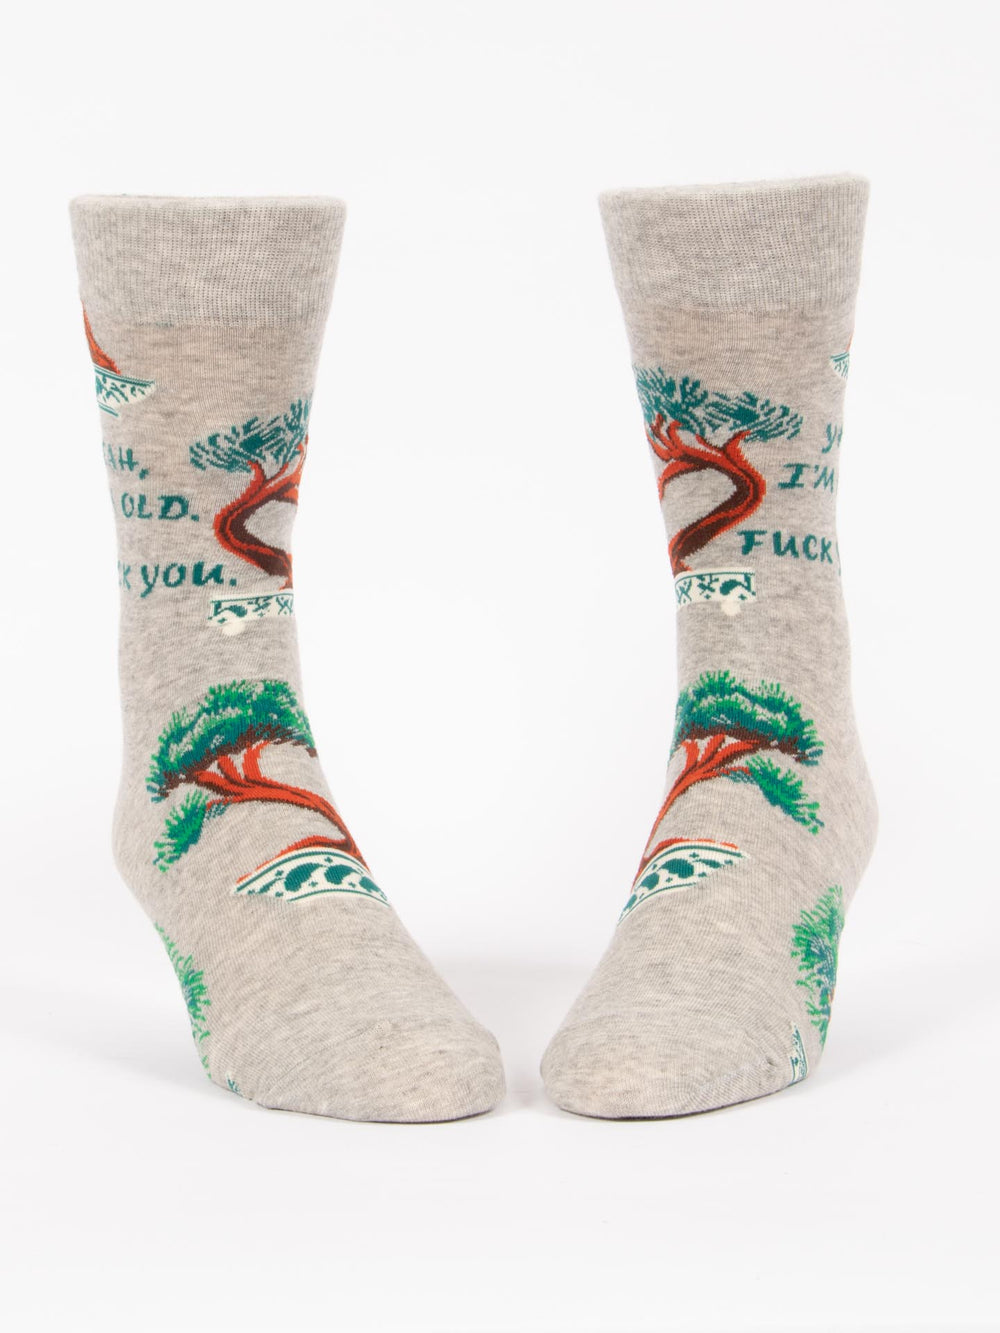 Yeah, I'm Old. Fuck You. Men's Crew Socks - Kingfisher Road - Online Boutique